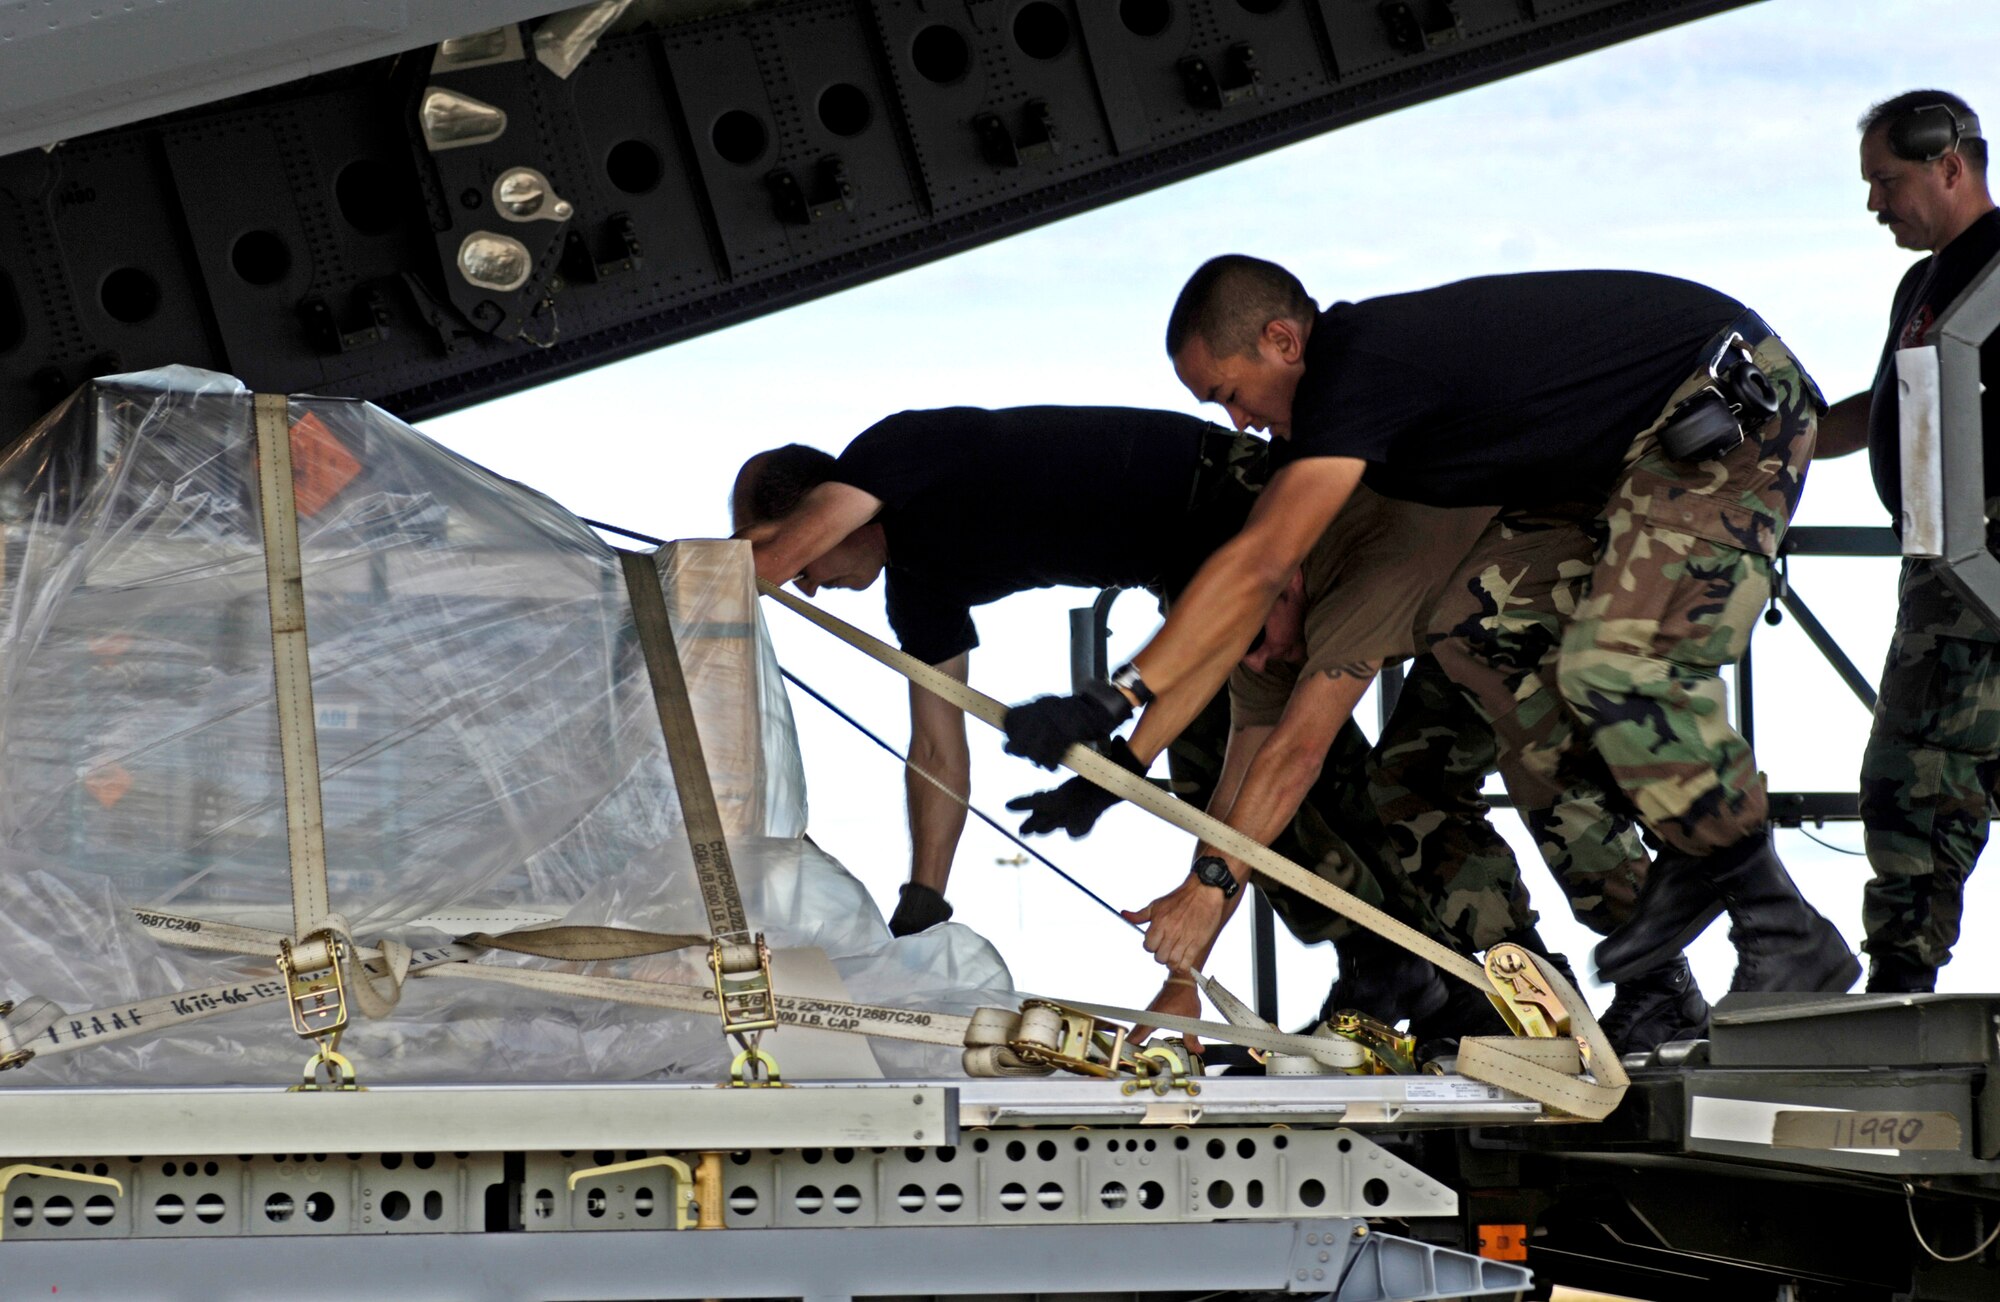 Airmen from the Combat Mobility Element, or CME, push a cargo pallet onto a C-17 Globemaster III at Royal Australian Air Force Base Townsville, Australia, on Tuesday, May 30, 2006. The CME is part of the 15th Logistical Readiness Squadron at Hickam Air Force Base, Hawaii. The CME is in Townsville to help prepare and load equipment on C-17s from Hickam that are repositioning Australian Defense Forces to better support peace operations in East Timor. (U.S. Air Force photo/Tech. Sgt. Shane A. Cuomo) 